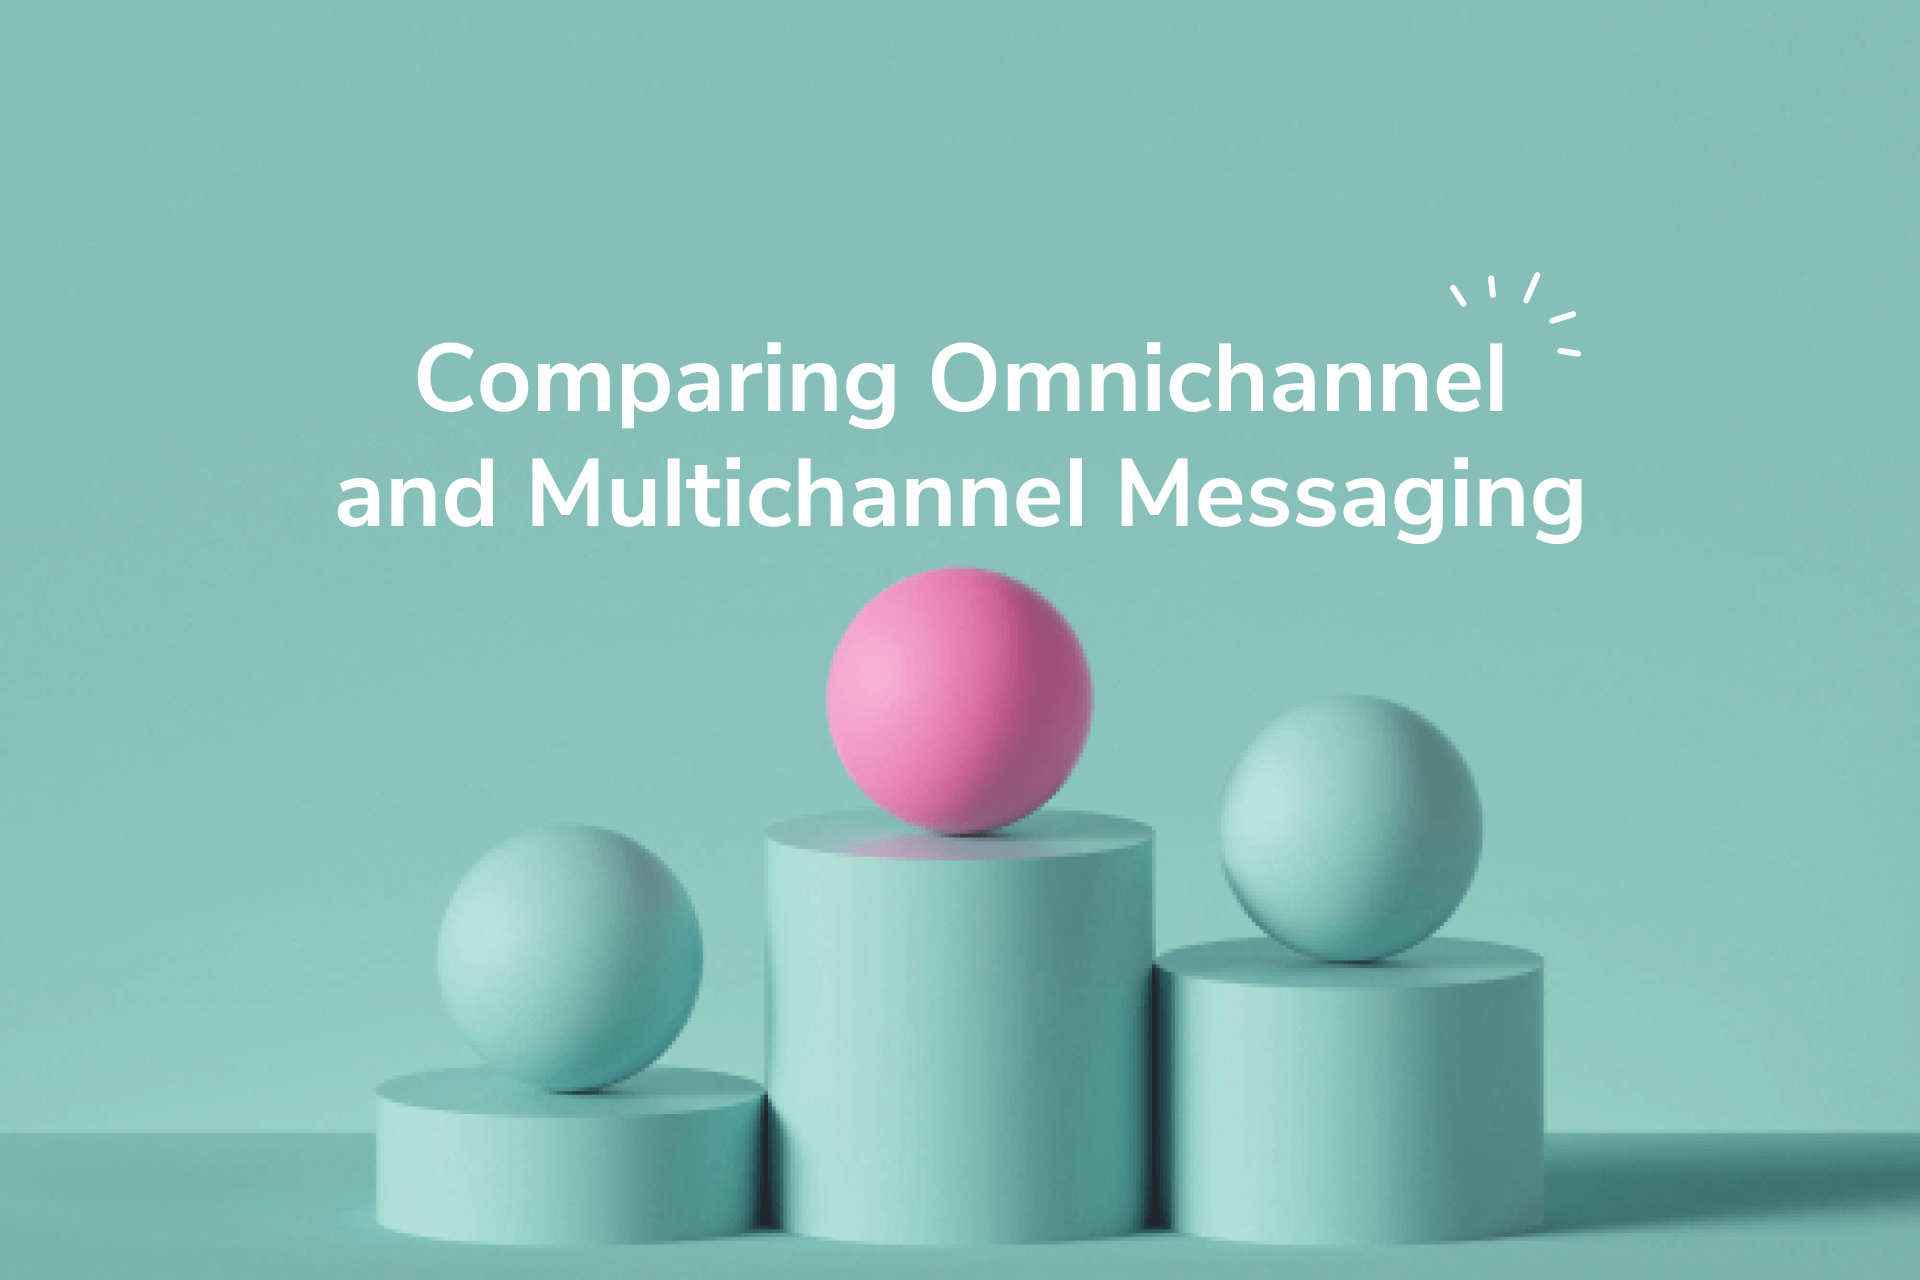 The Difference Between Omnichannel and Multichannel Marketing